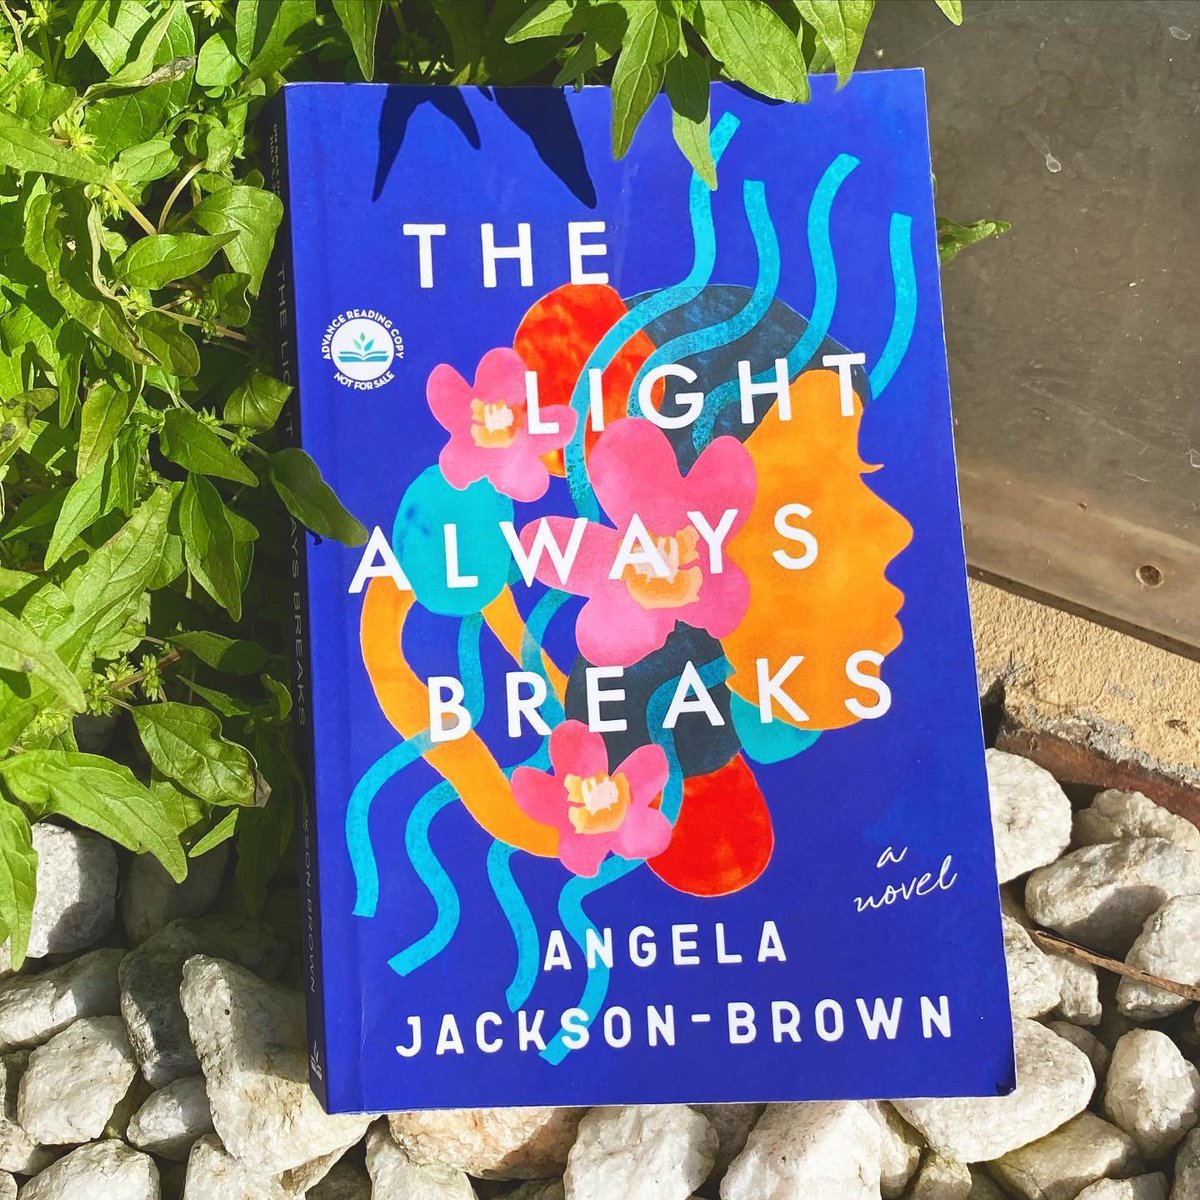 Just read this ARC of Angela Jackson-Brown's new book #TheLightAlwaysBreaks. It was powerful and heartwrenching. The book comes out next week (July 5) you can pre-order it now. 

angelajacksonbrown.com/the-light-alwa…